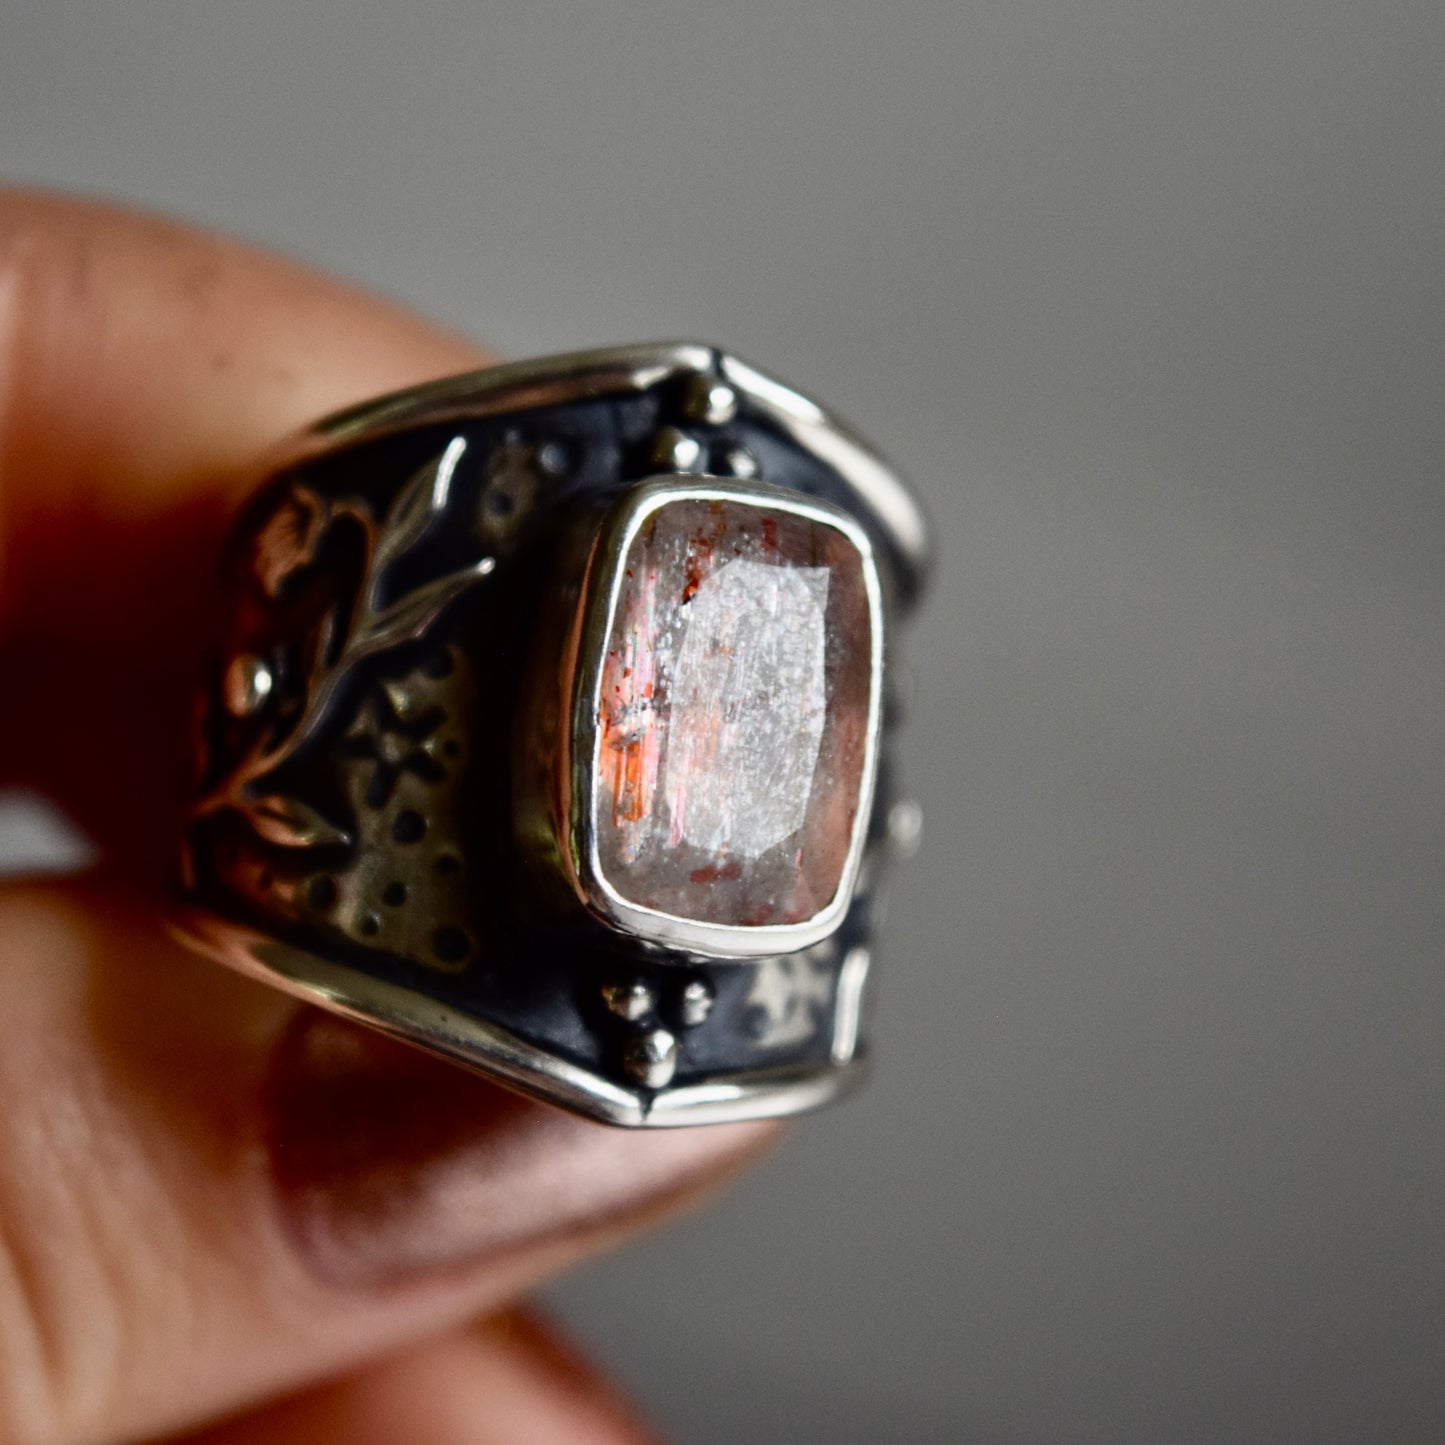 Belladonna Armor Shield Ring with Sunstone size 7.75